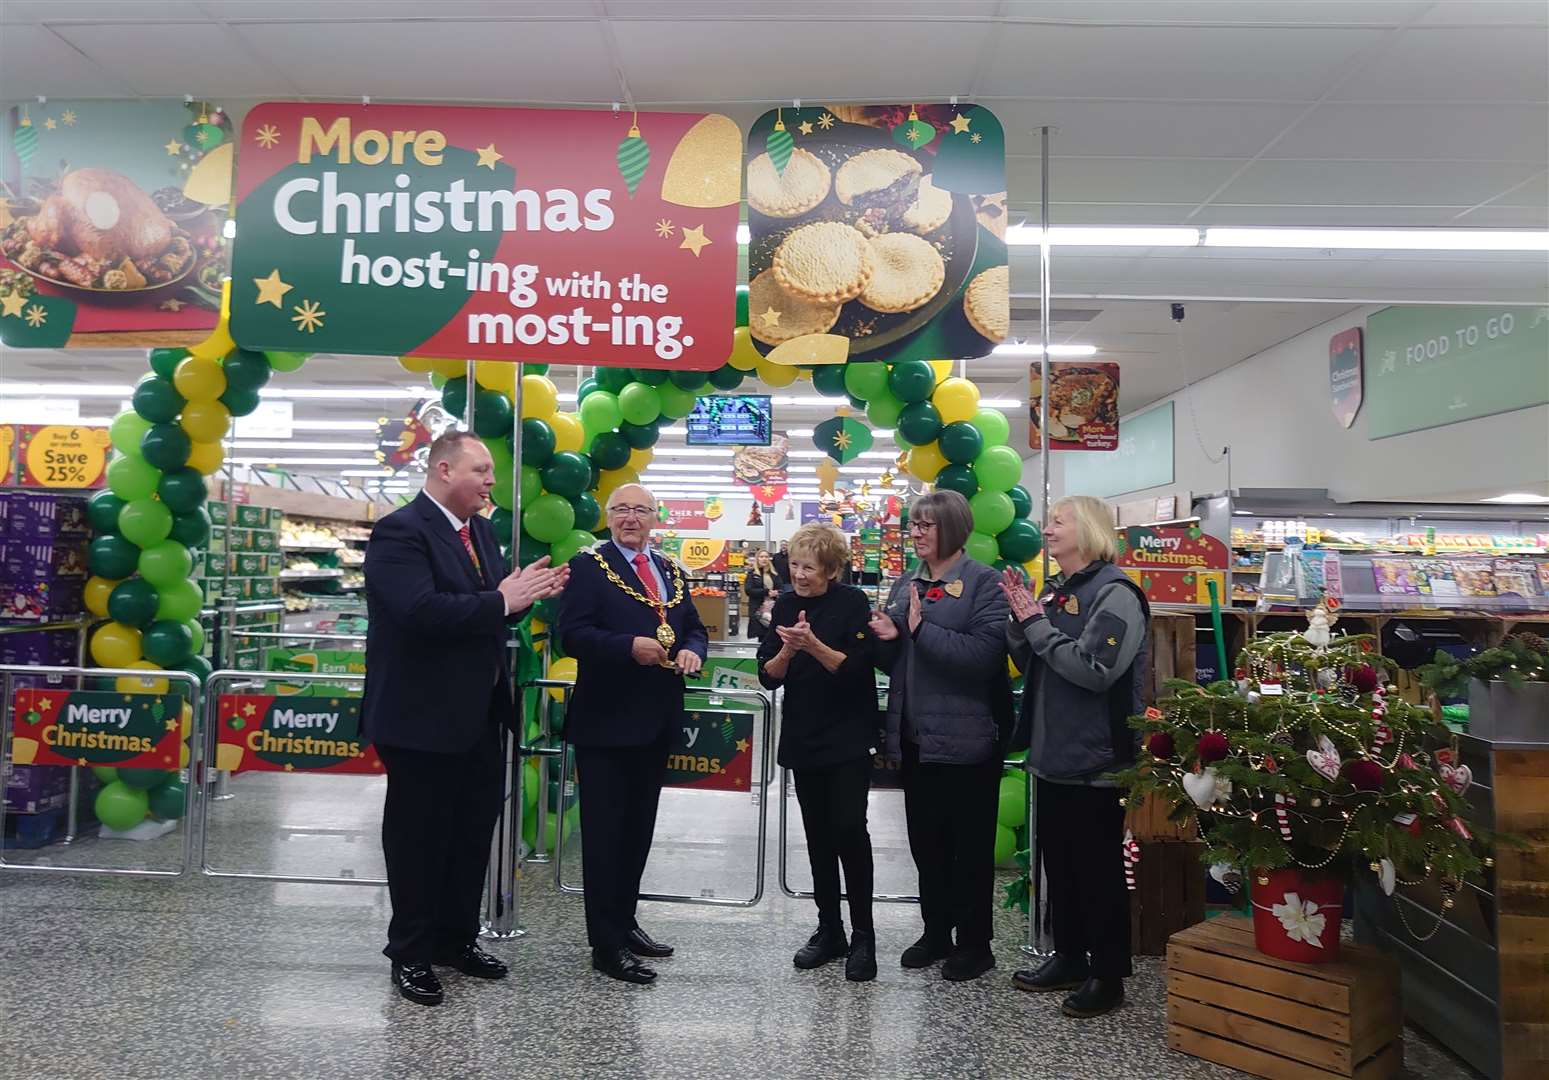 The new and improved branch was unveiled by the Mayor of Maidstone and store workers